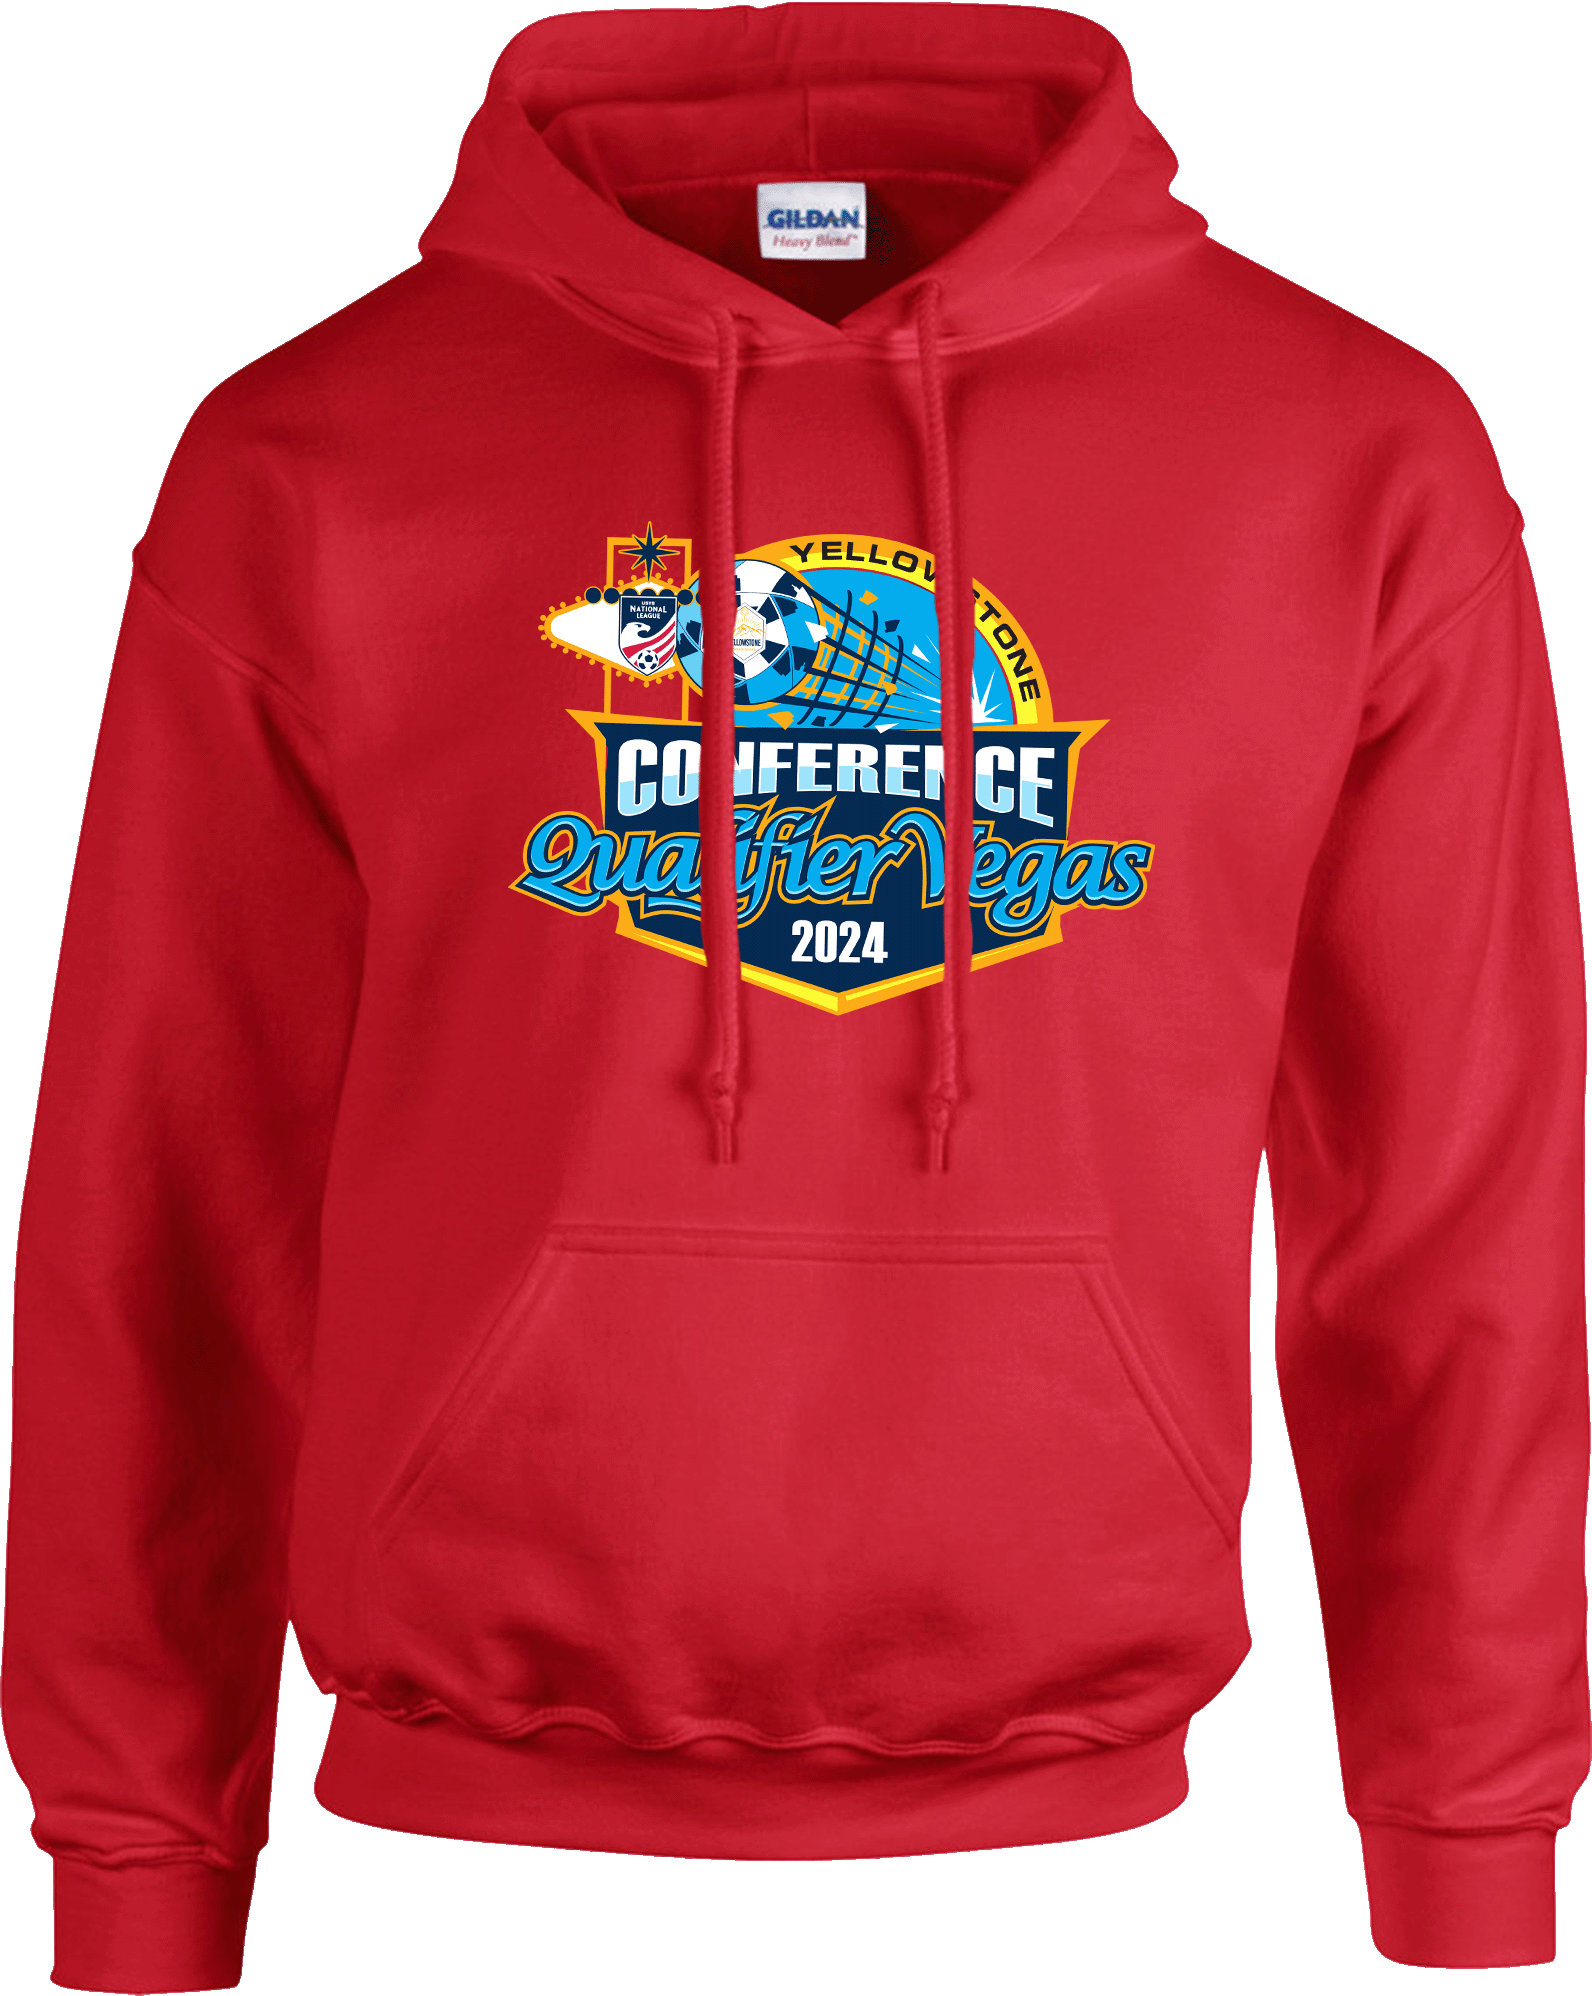 Hoodies - 2024 Yellowstone Conference Qualifier Vegas